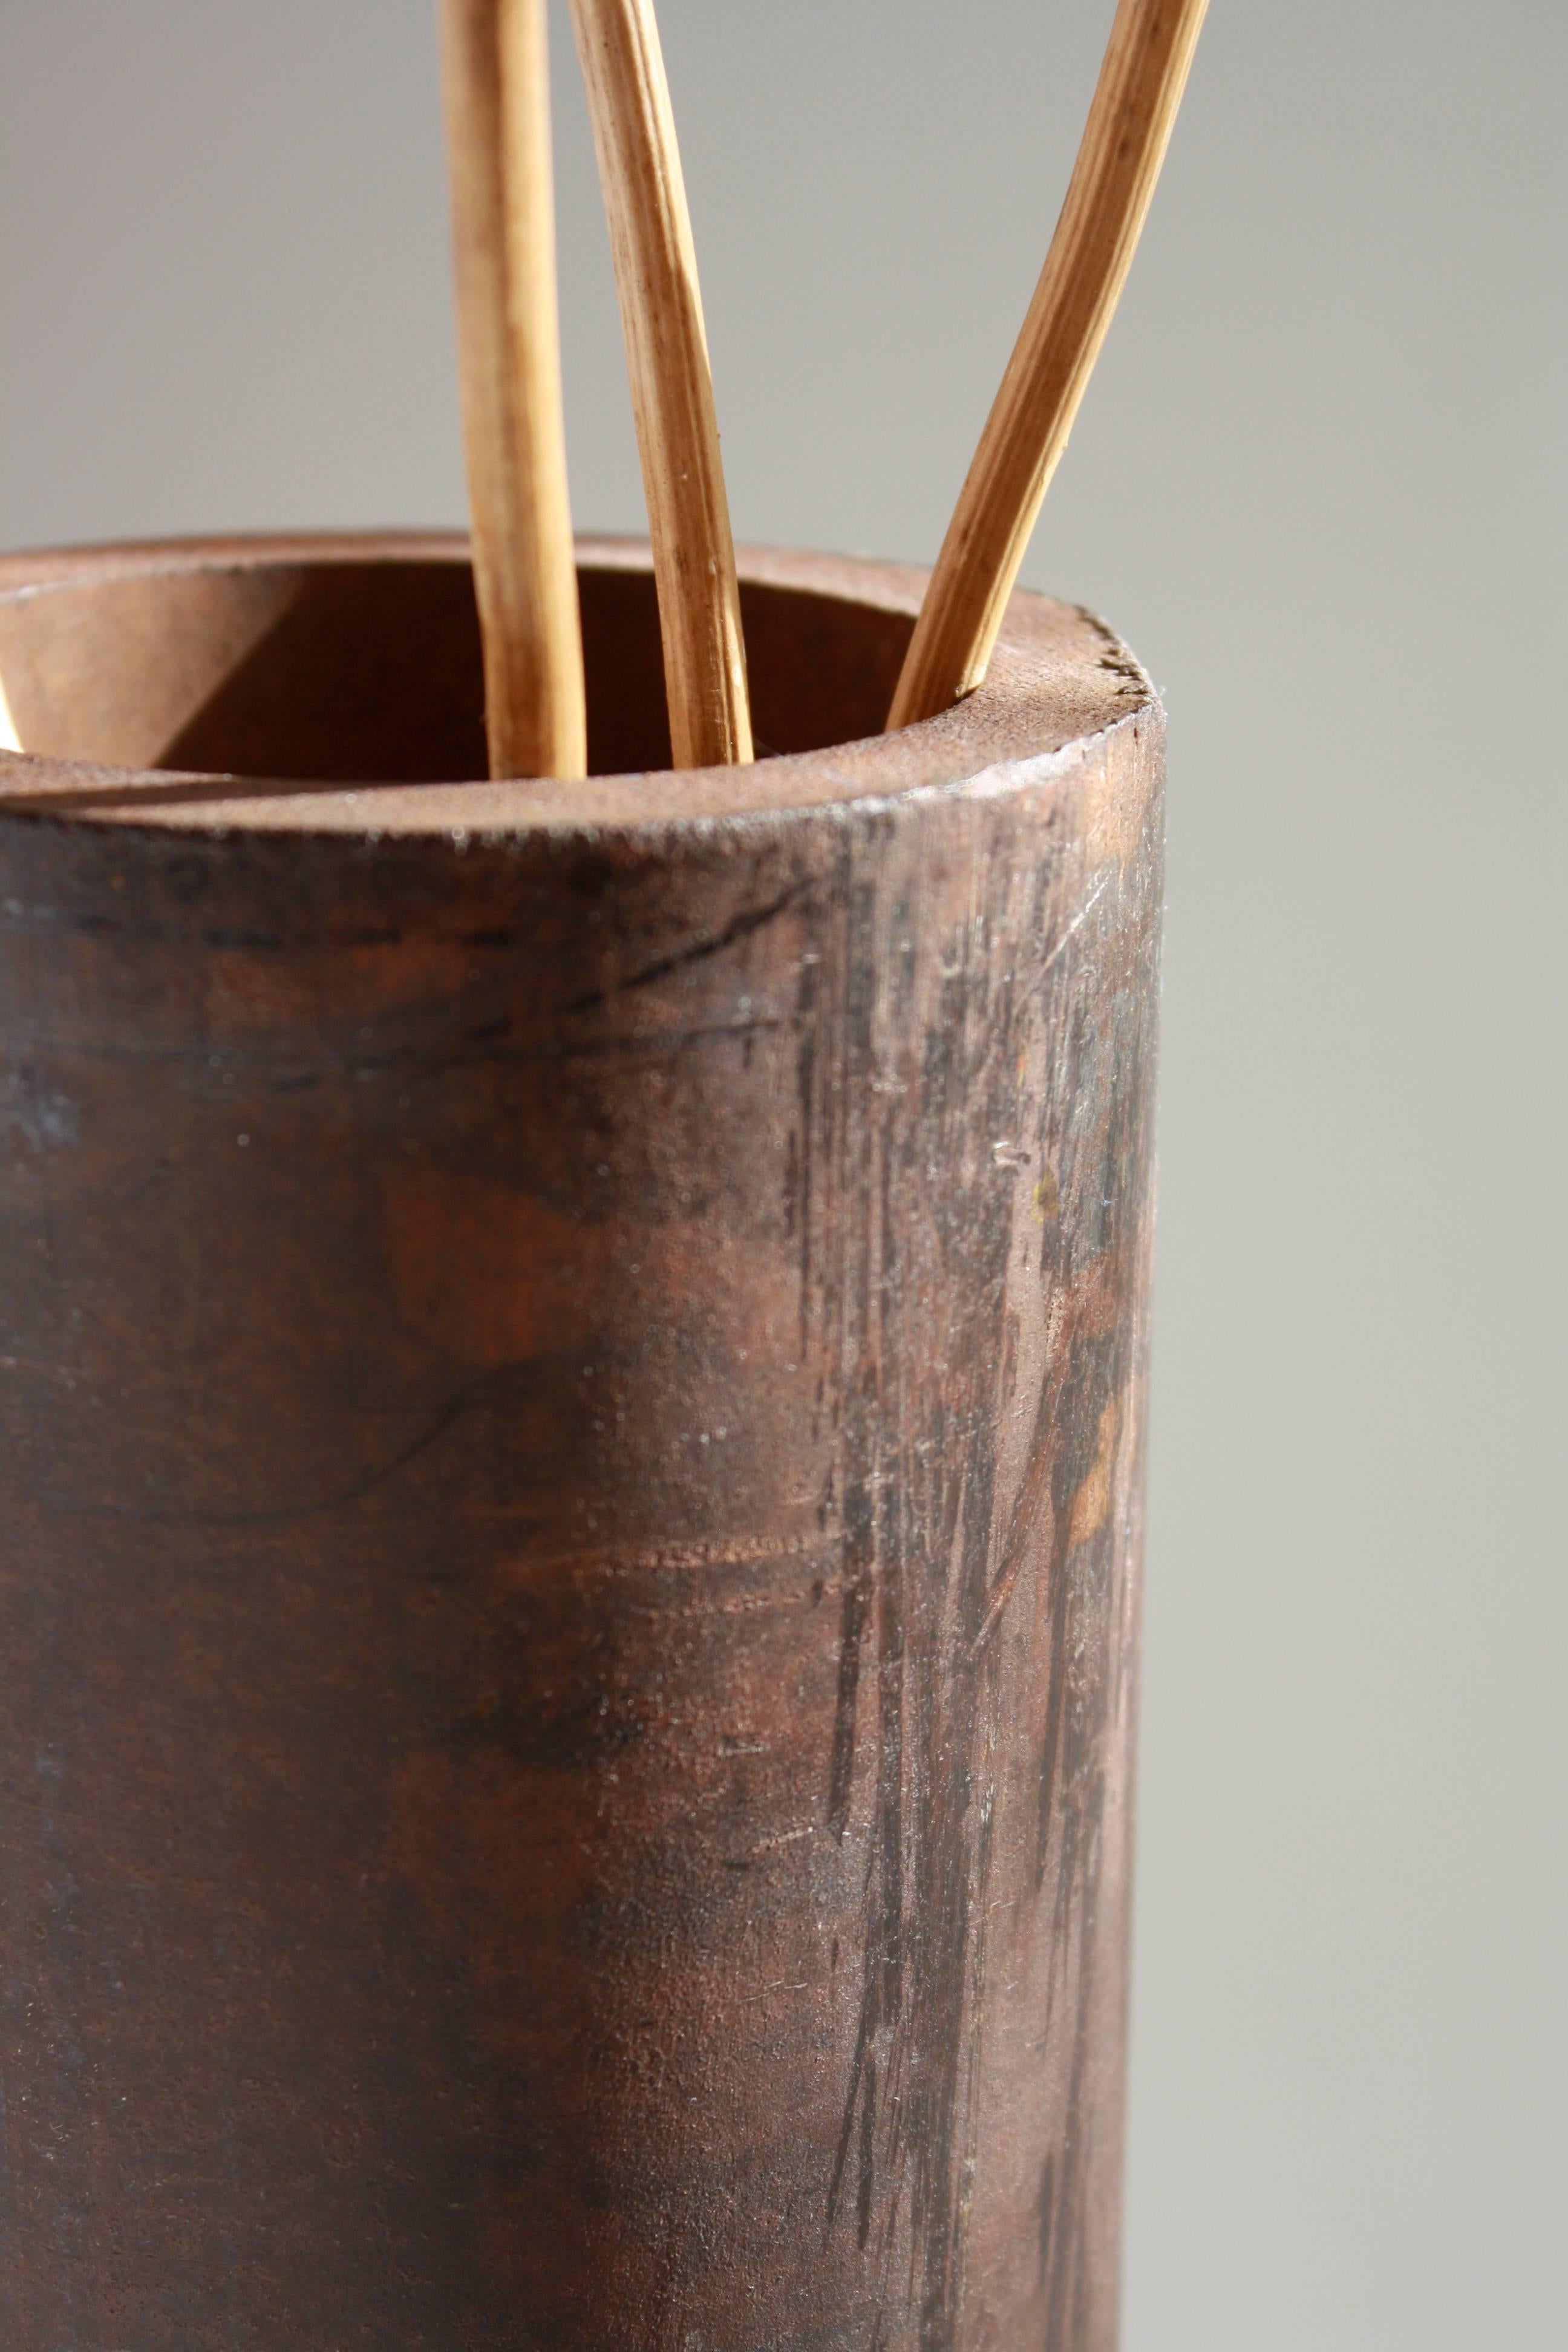 The DOM vase, an original design offered exclusively by Vermontica, is a Contemporary Minimalist patinated steel vase designed and produced in Vermont by Scott Gordon. The vase measures 4